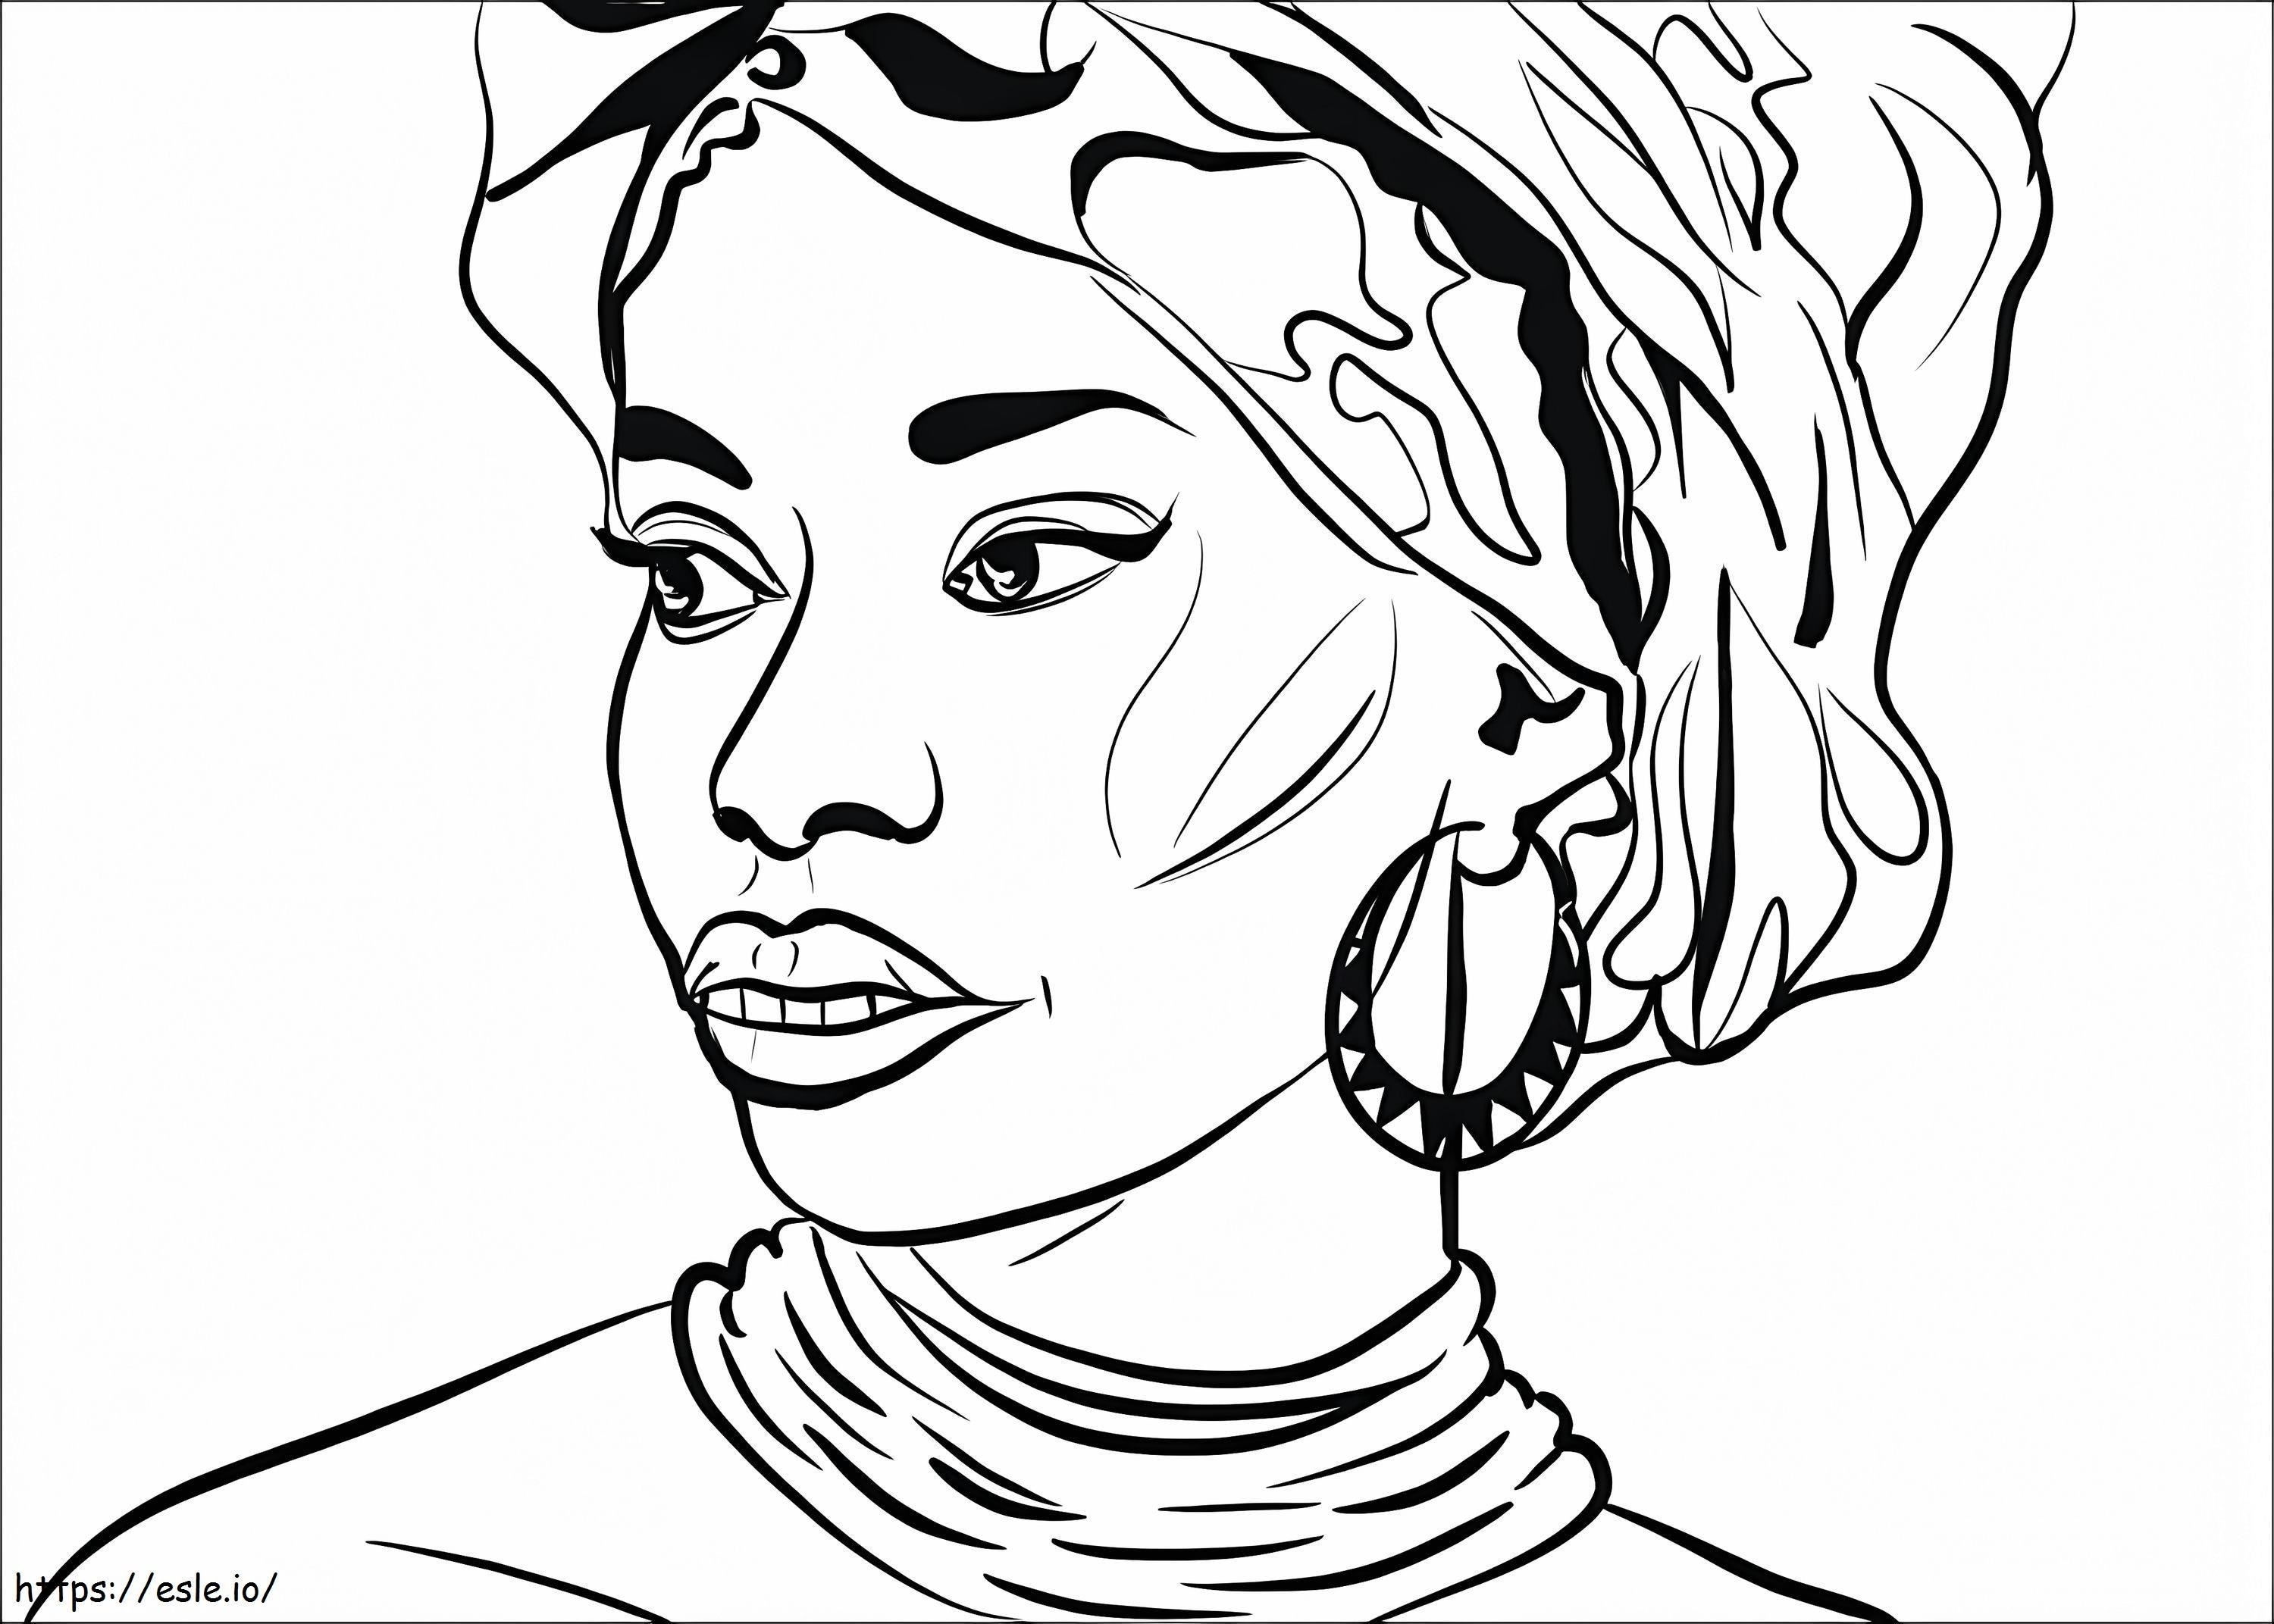 African Woman coloring page